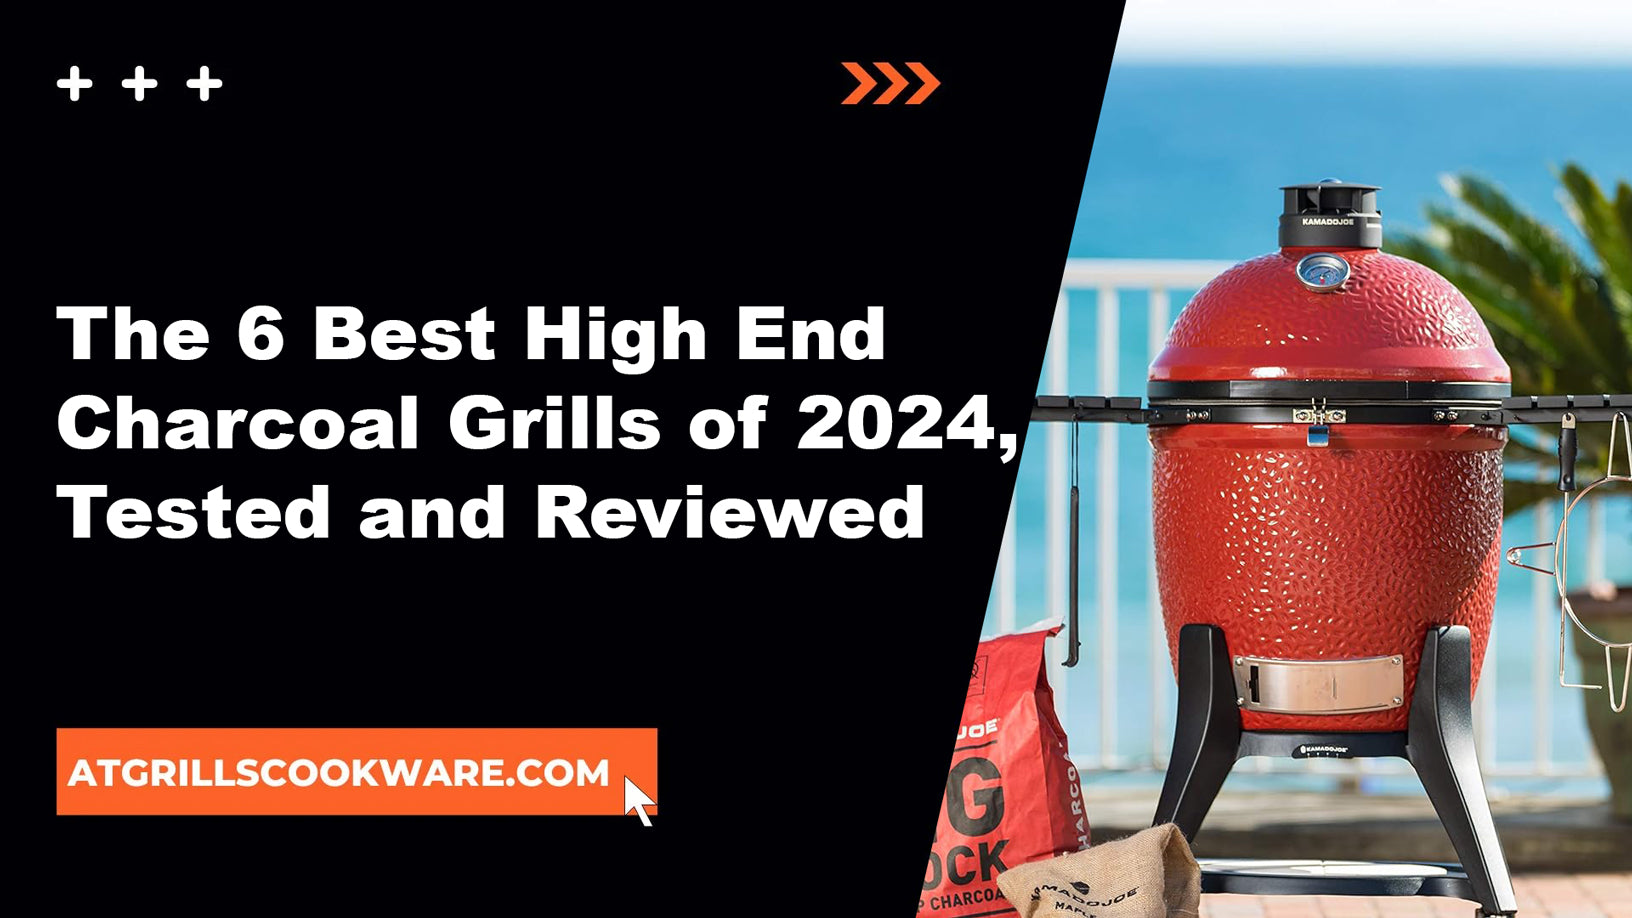 The 6 Best High-End Charcoal Grills of 2024, Tested and Reviewed